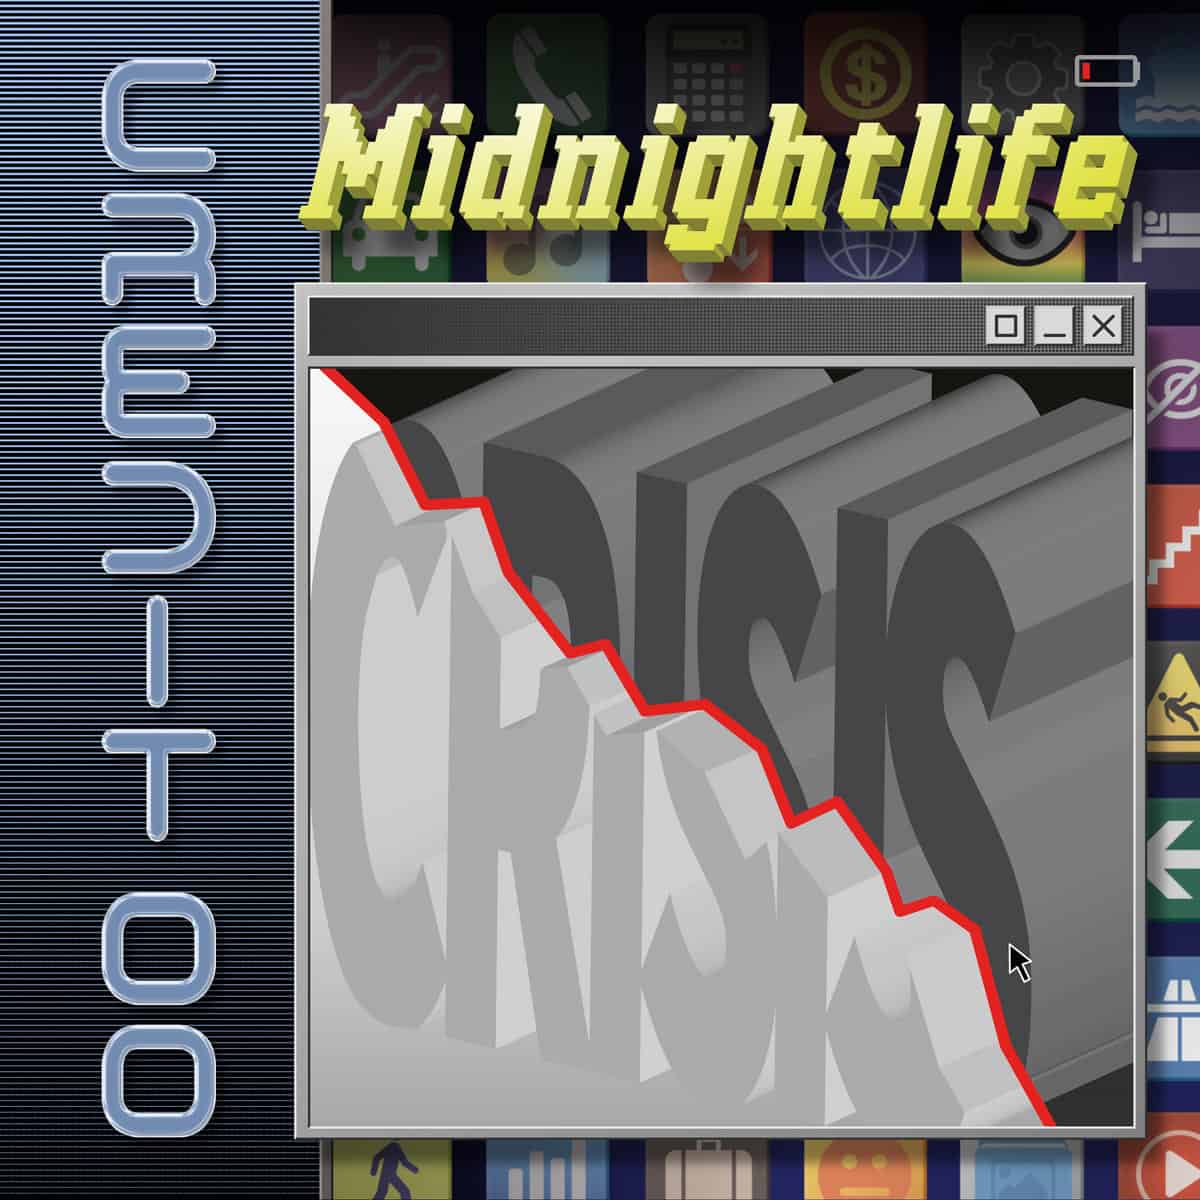 image cover: Credit 00 - Midnightlife Crisis on Pinkman